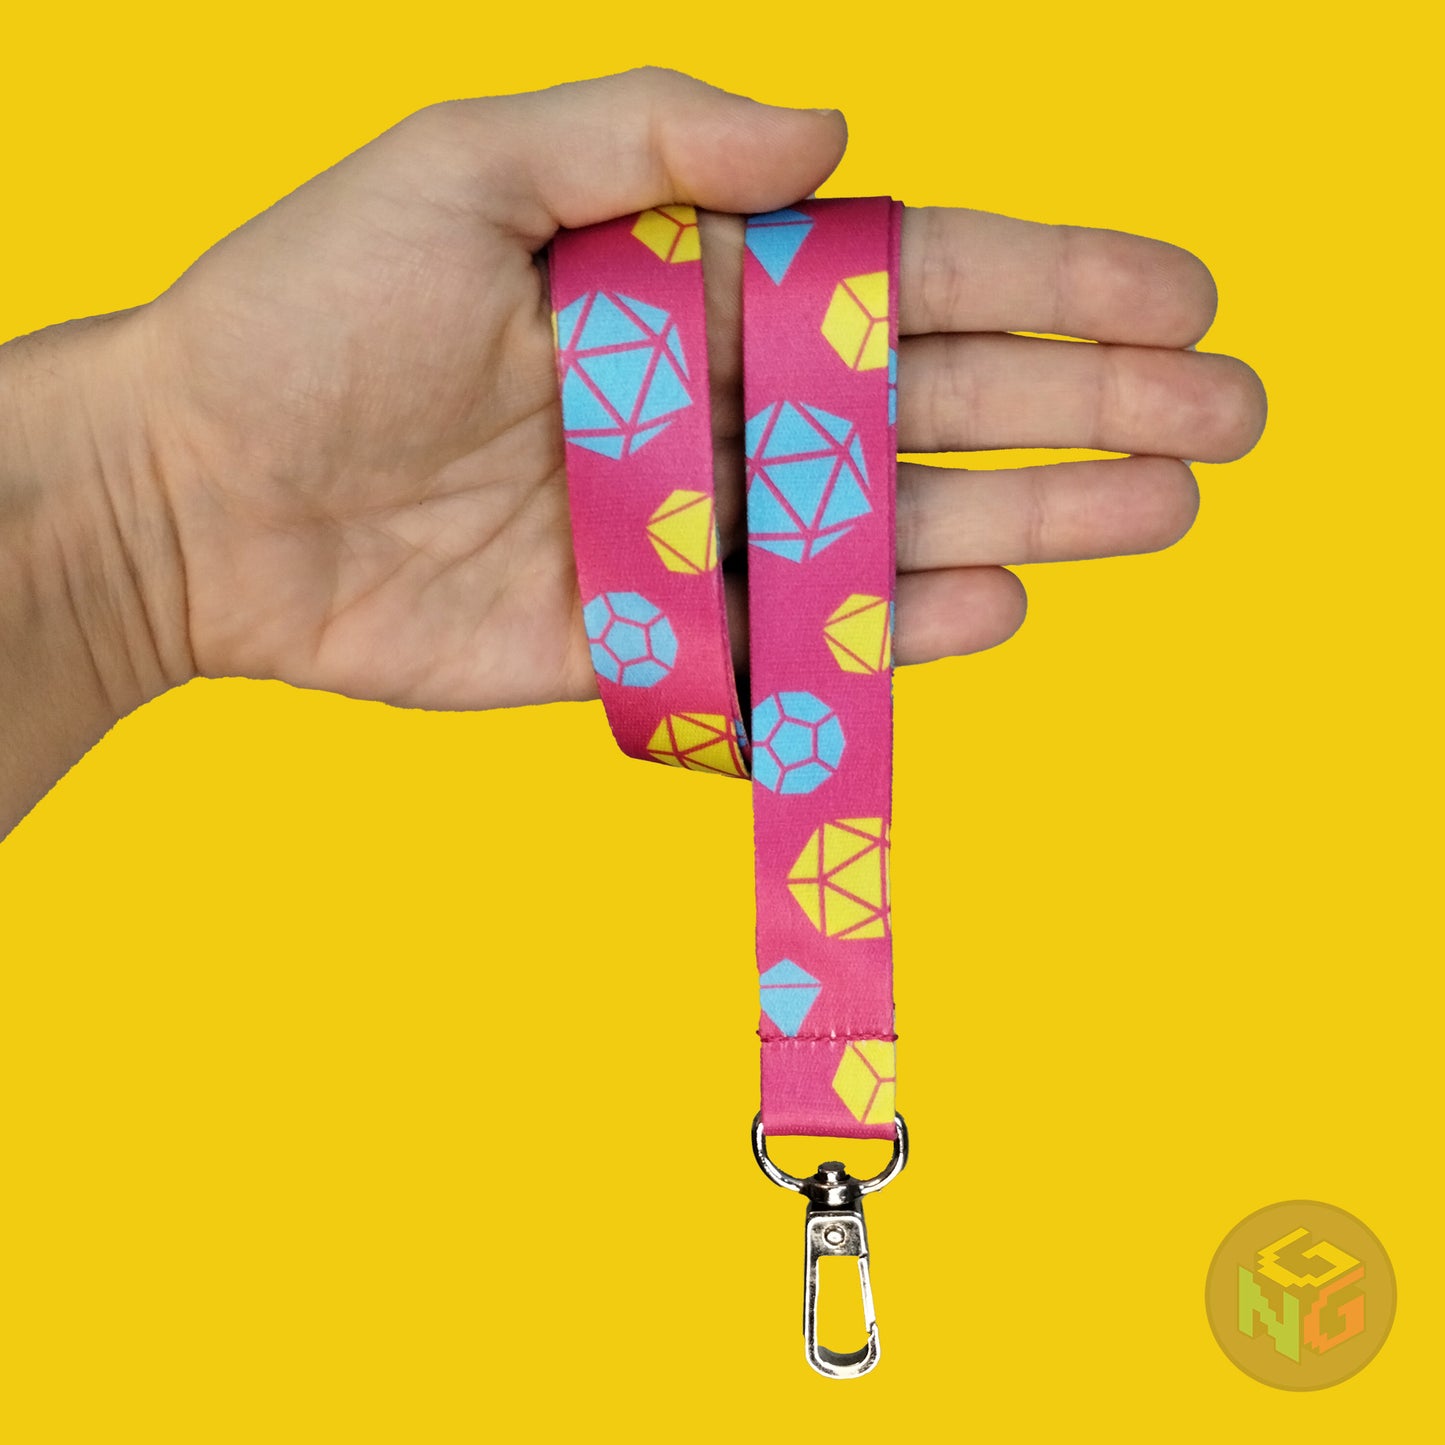 pink pansexual dice lanyard wrapped around a hand with the lobster clasp dangling against a yellow background